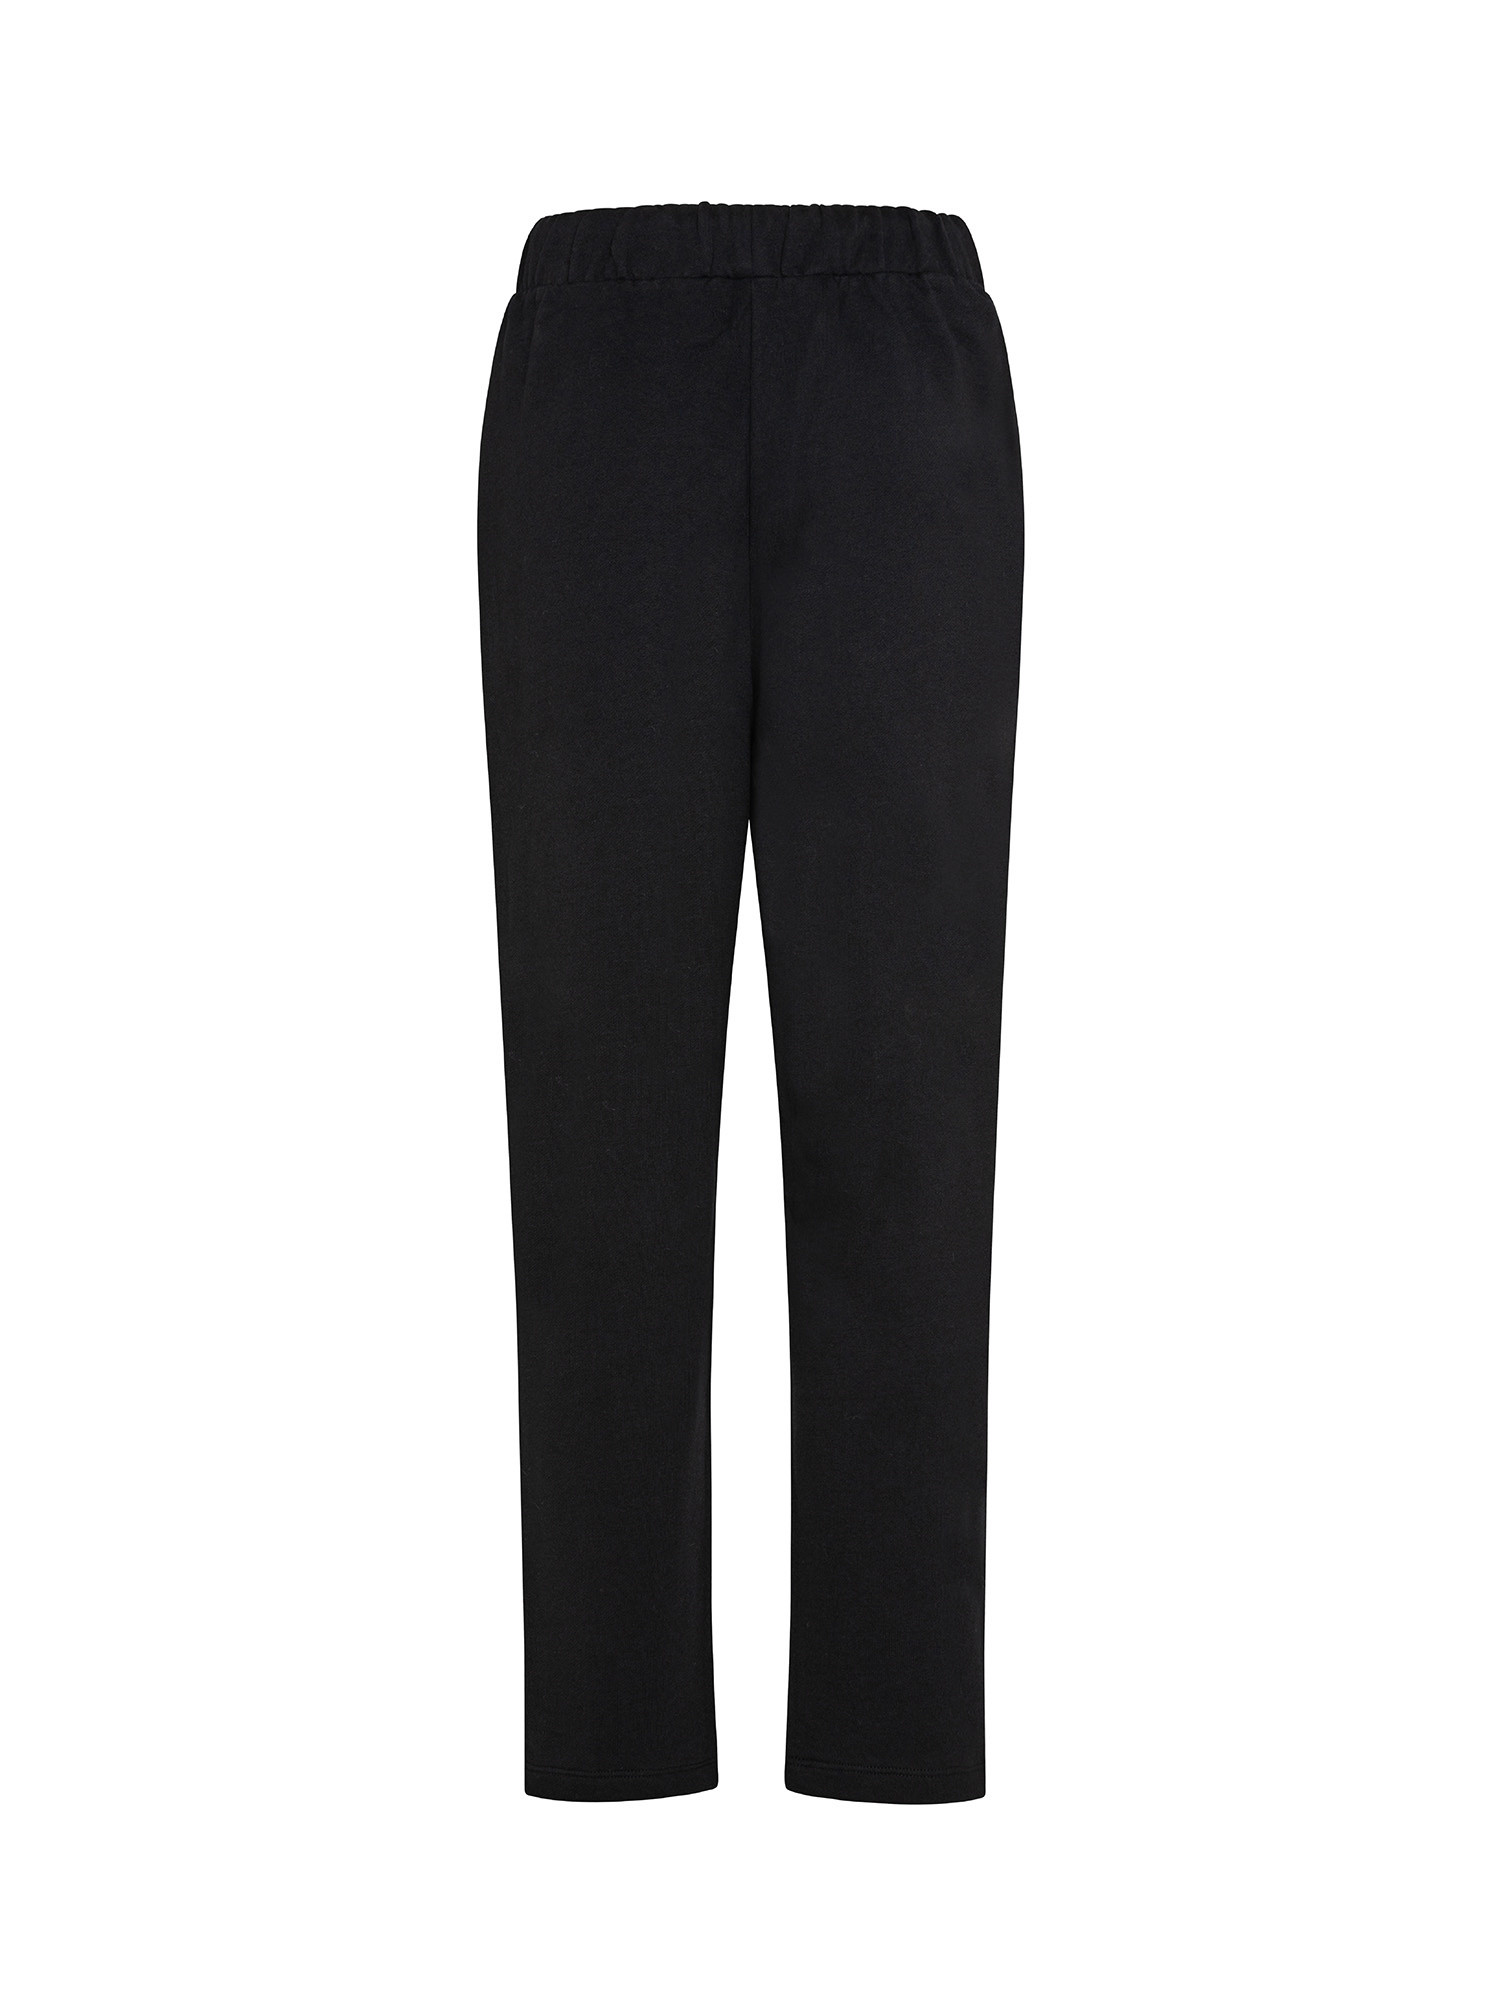 Ecoalf - Mills trousers with elasticated waist, Black, large image number 1